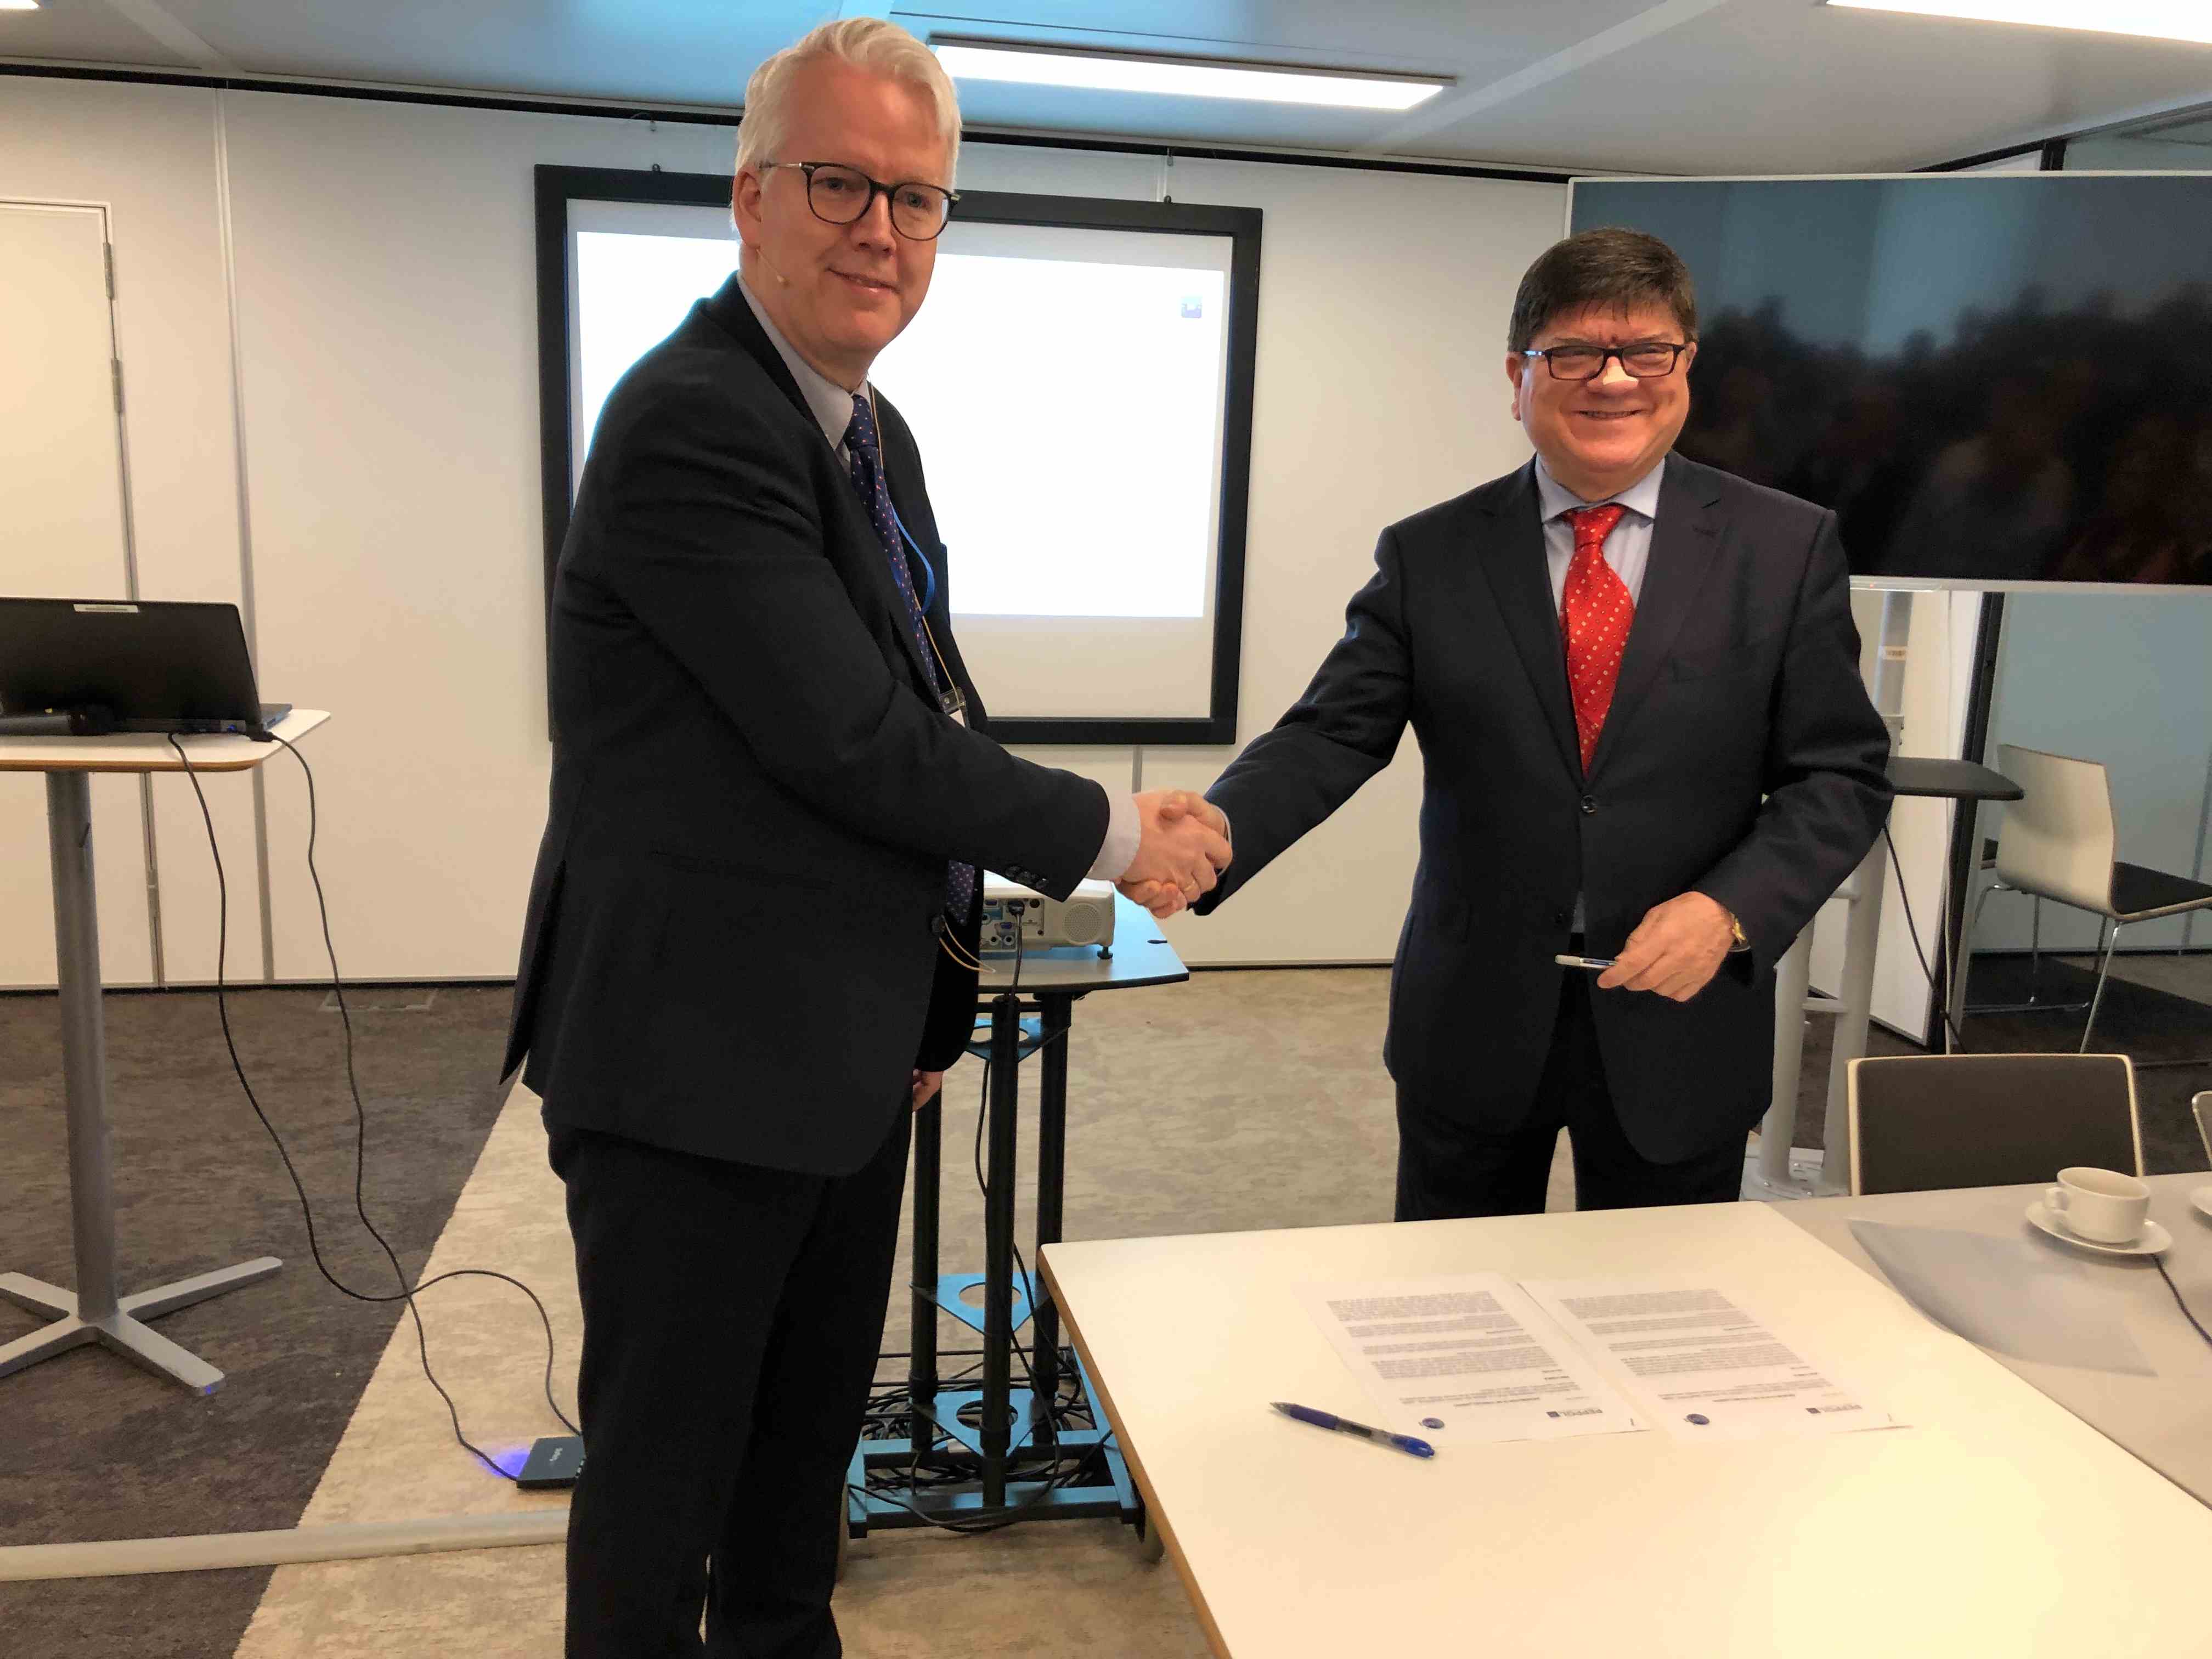 OpenPEPPOL and GS1 sign a Memorandum of Understanding to generate further benefits for their users